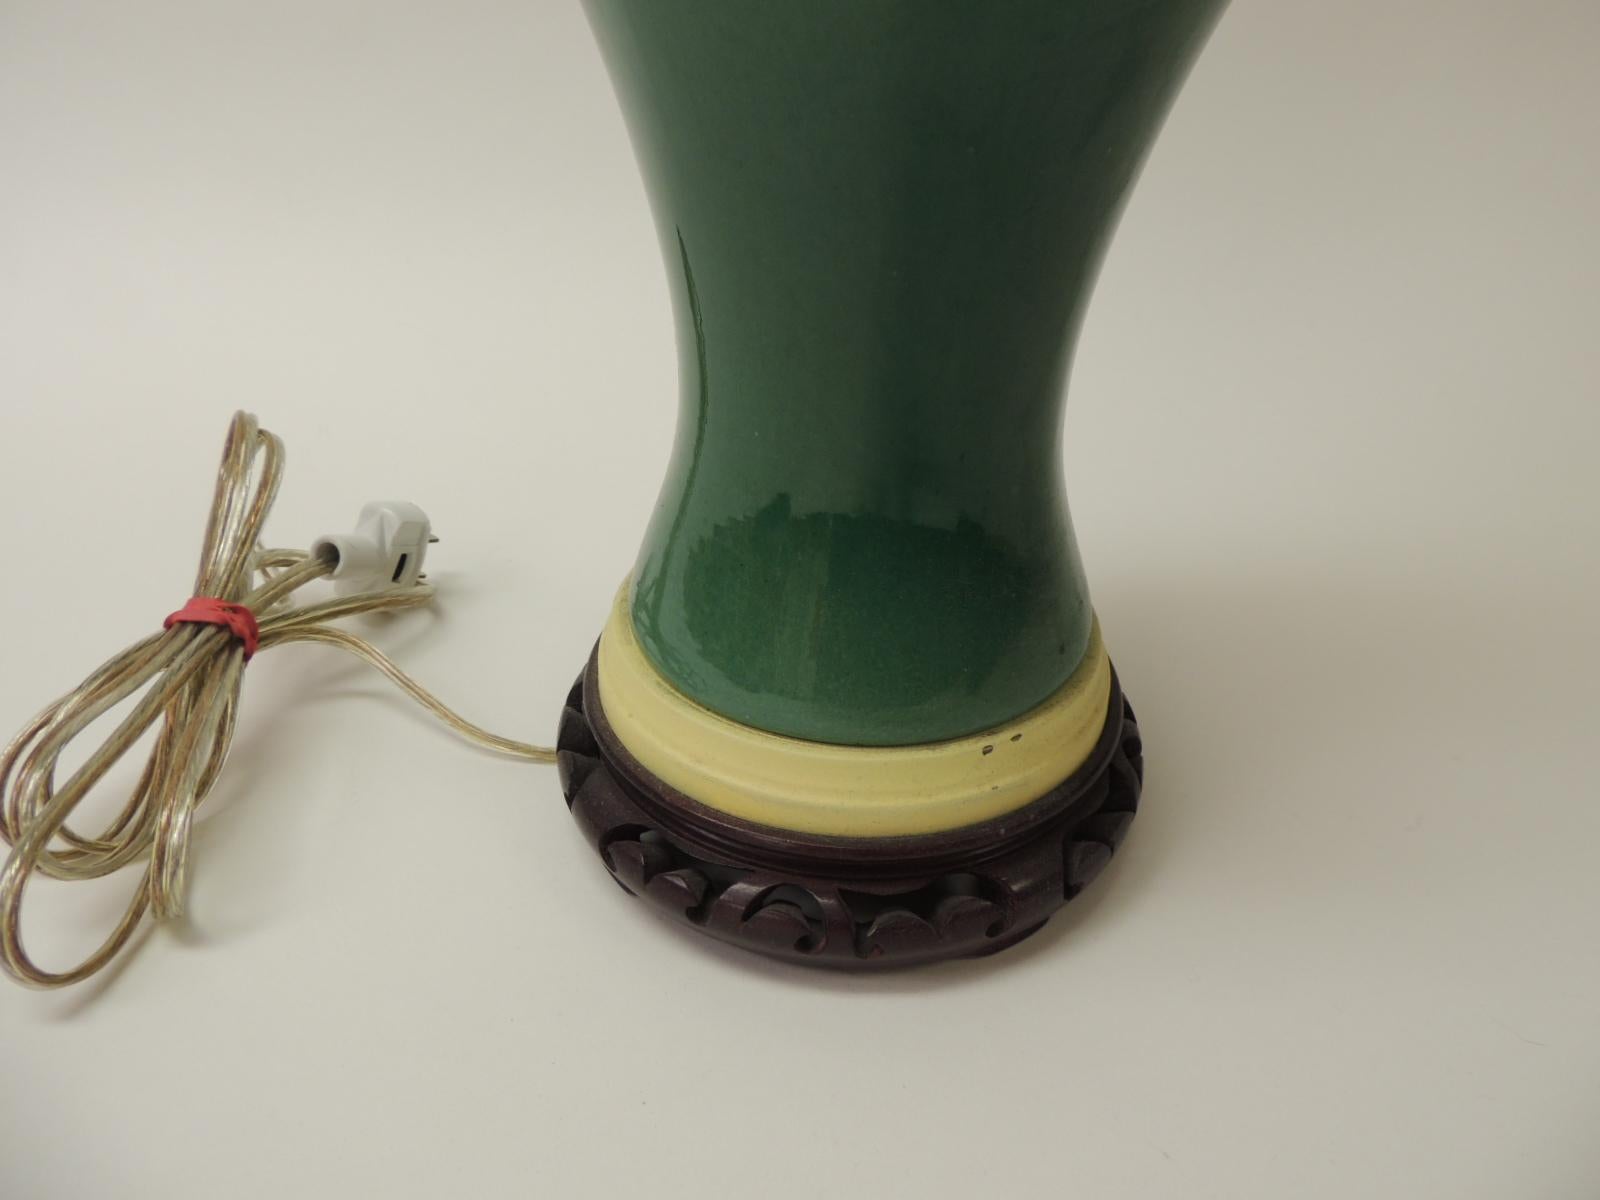 Vintage Green Ceramic Lamp with Brass Fittings (Chinesischer Export)